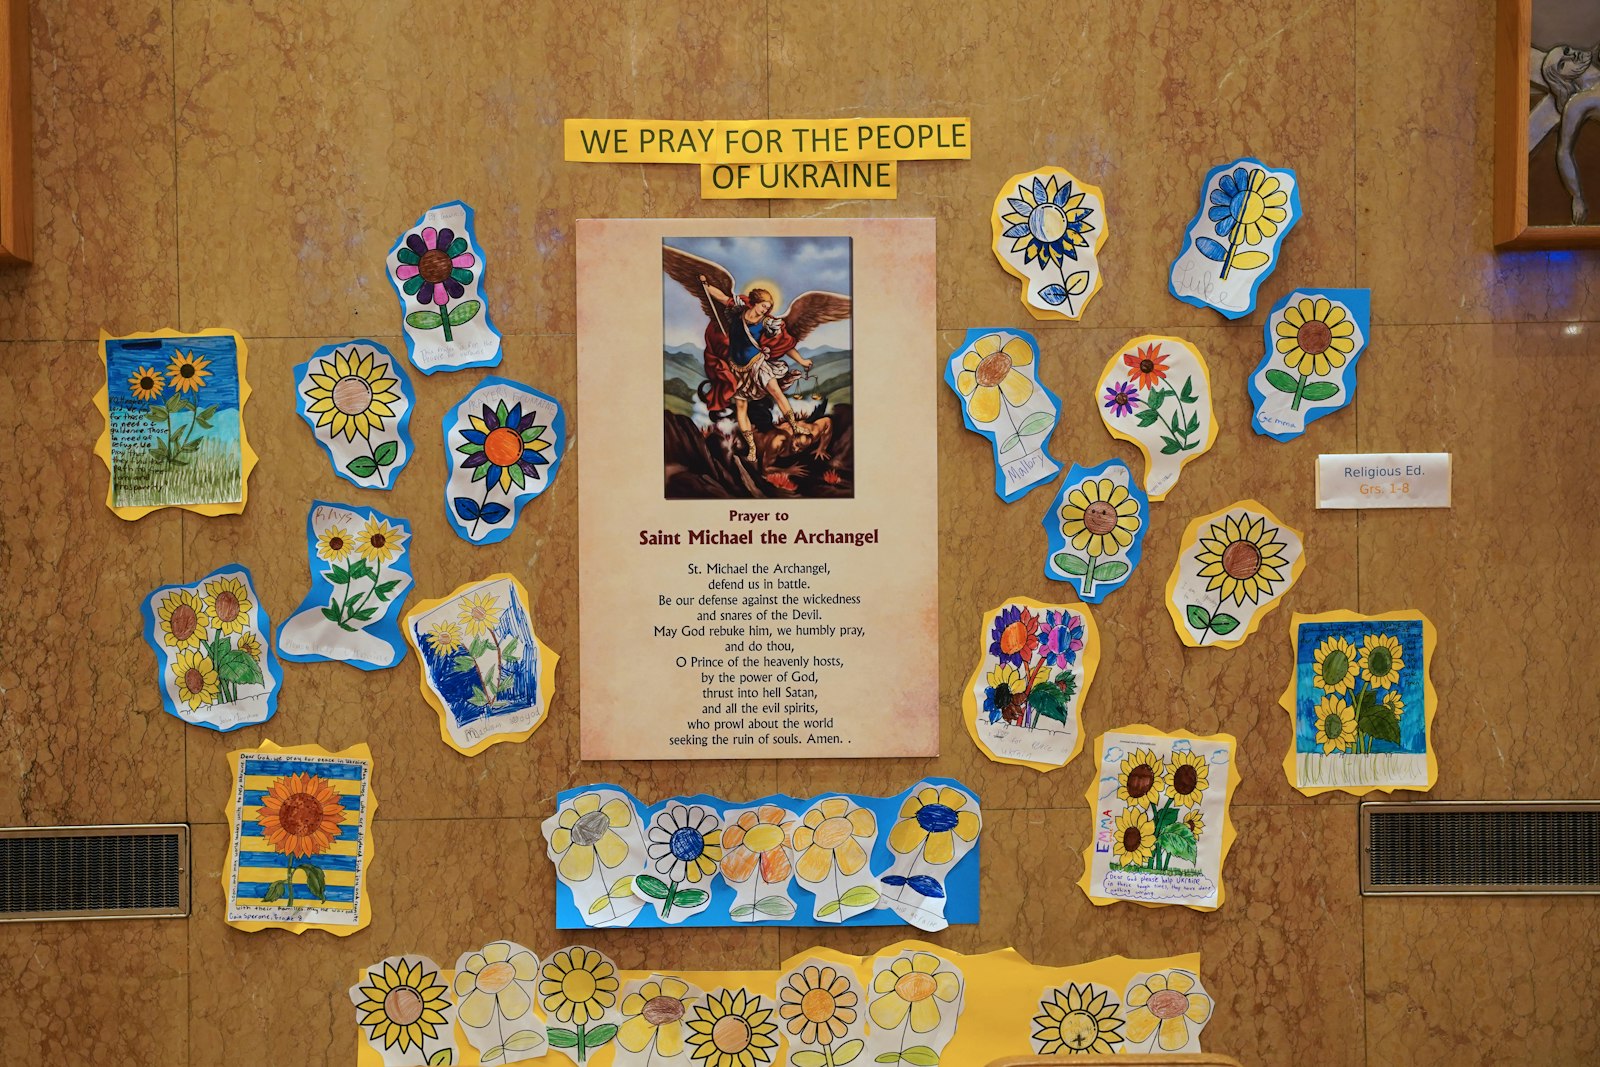 St. Clare of Montefalco School students made a display featuring St. Michael the Archangel, patron saint of Kyiv, capital of Ukraine. Ever since Russia invaded Ukraine on Feb. 24, the people of Ukraine have been in the parish's prayer intentions.